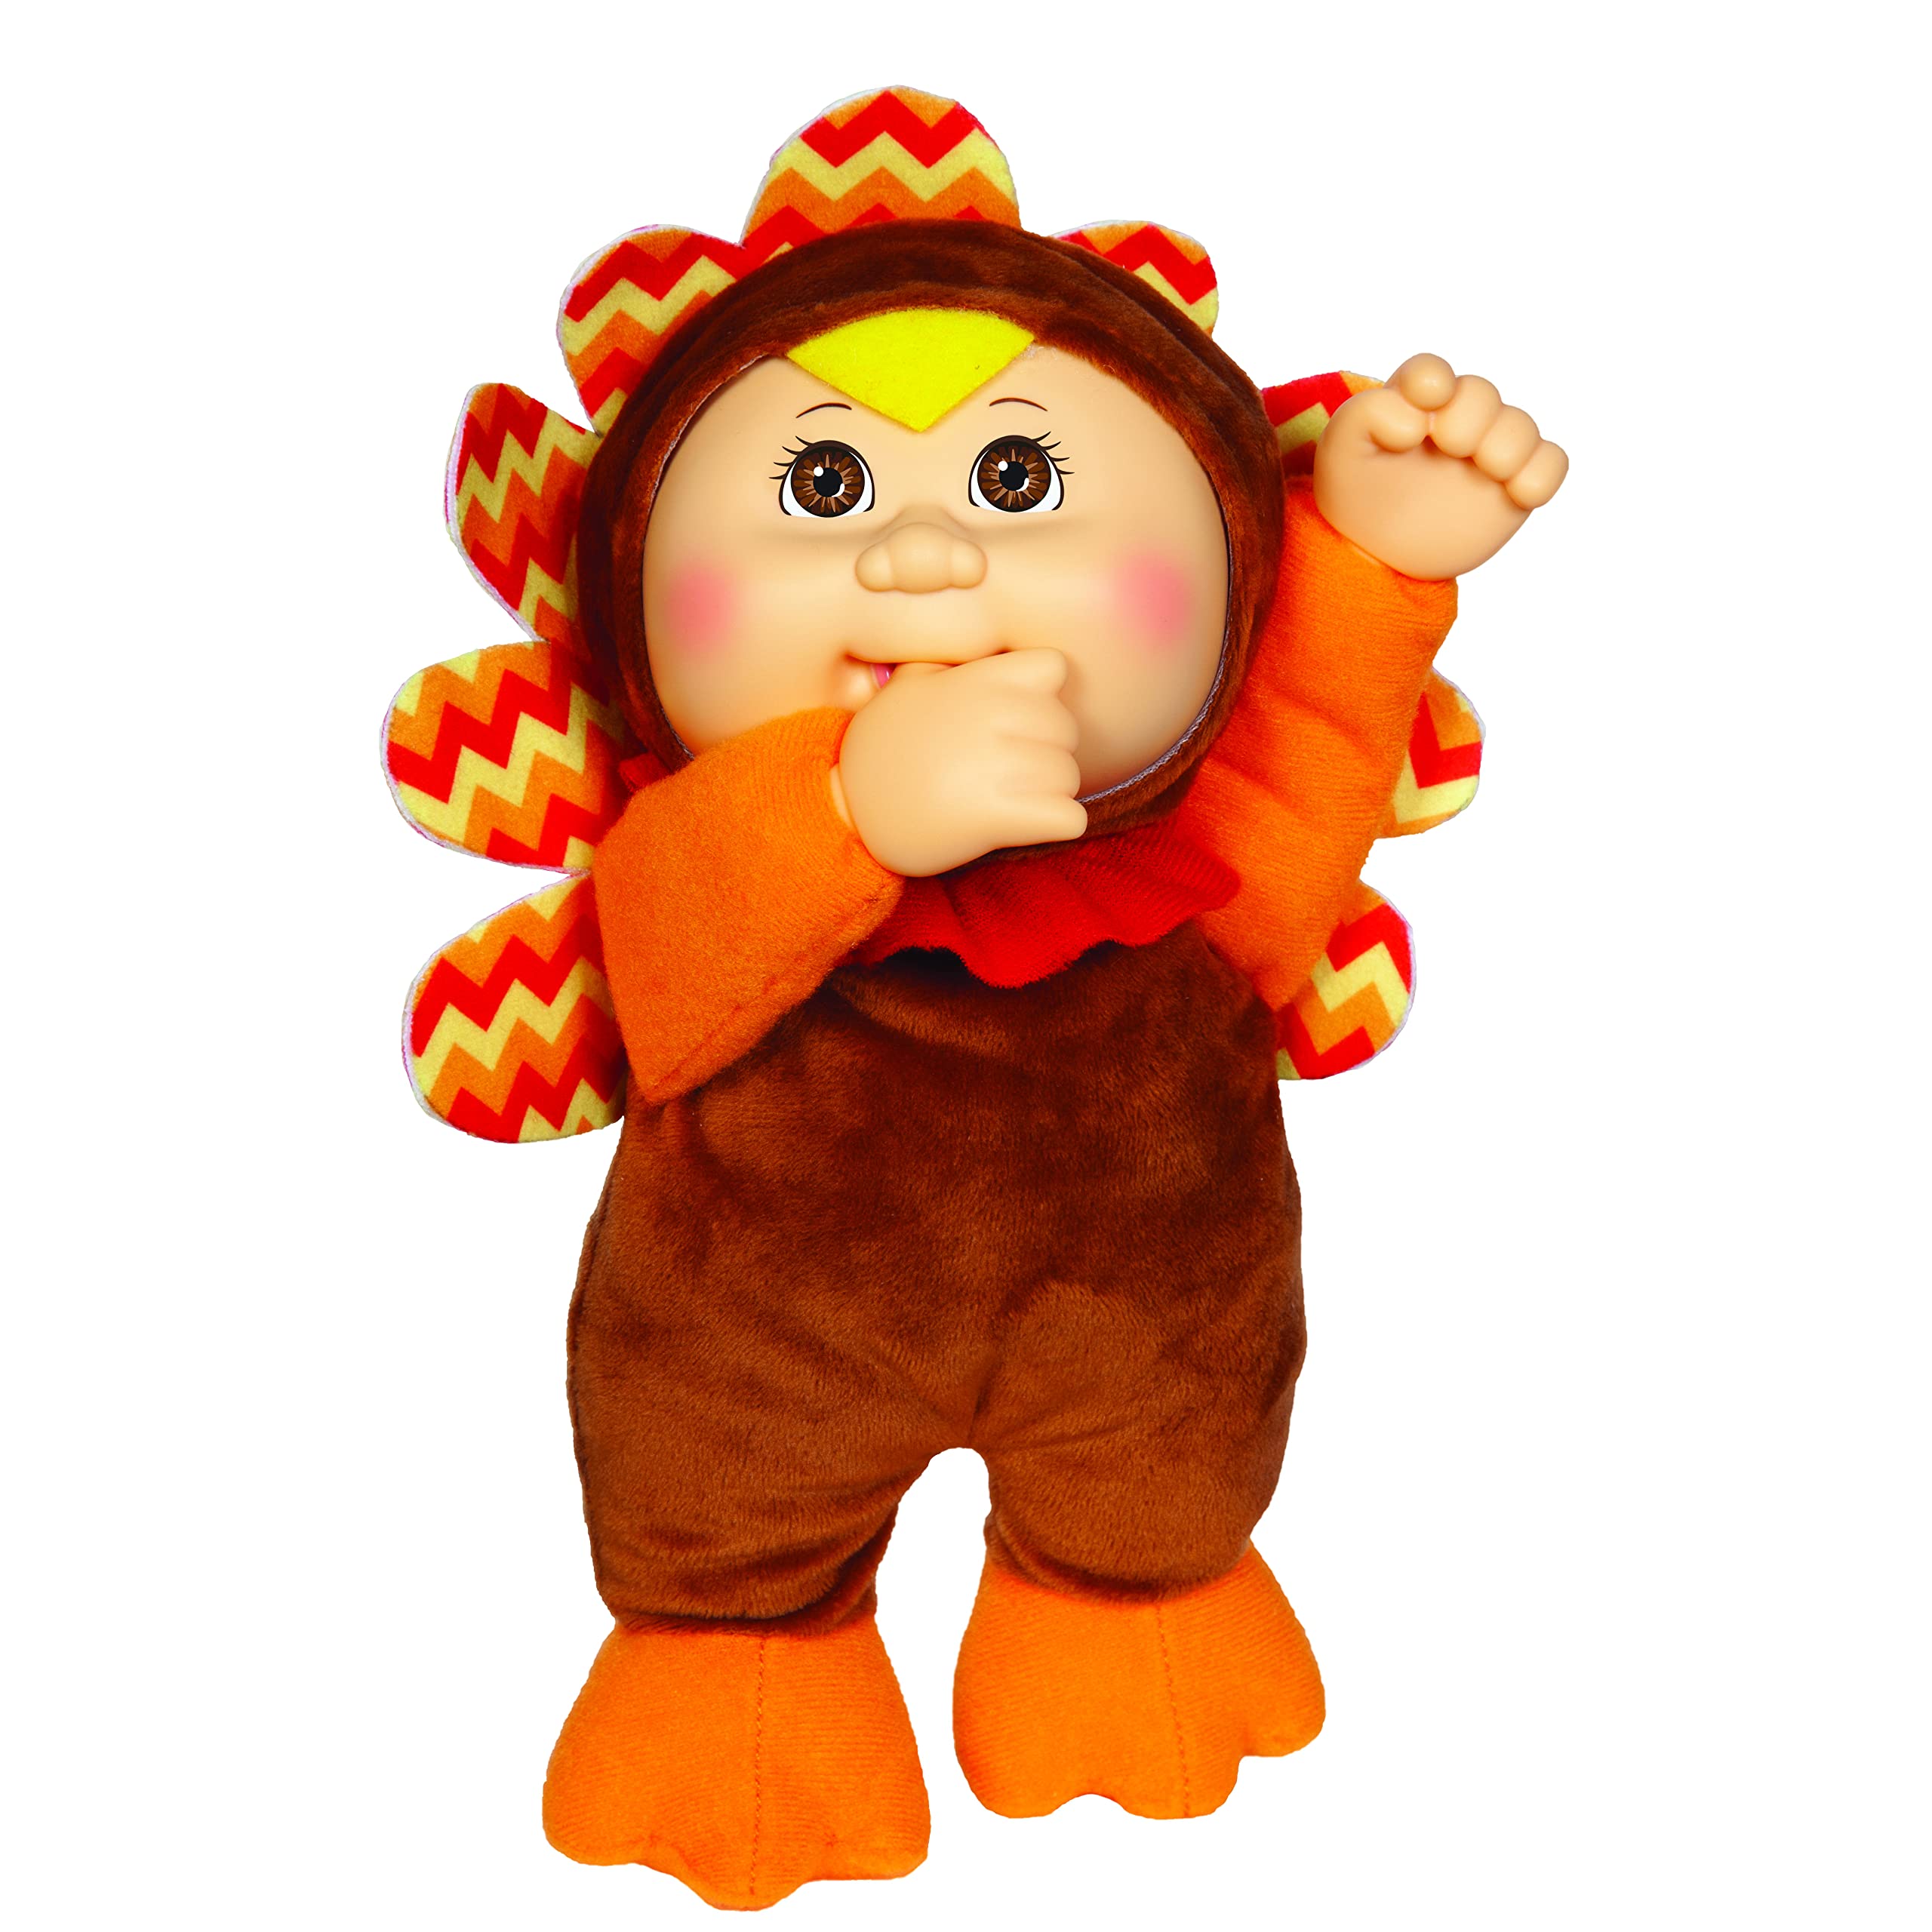 JAZWARES Cabbage Patch Kids Cutie Collection Tilly The Turkey, 9 - Collectible, Adoptable Holiday Baby Doll Toy - Officially Licensed - A